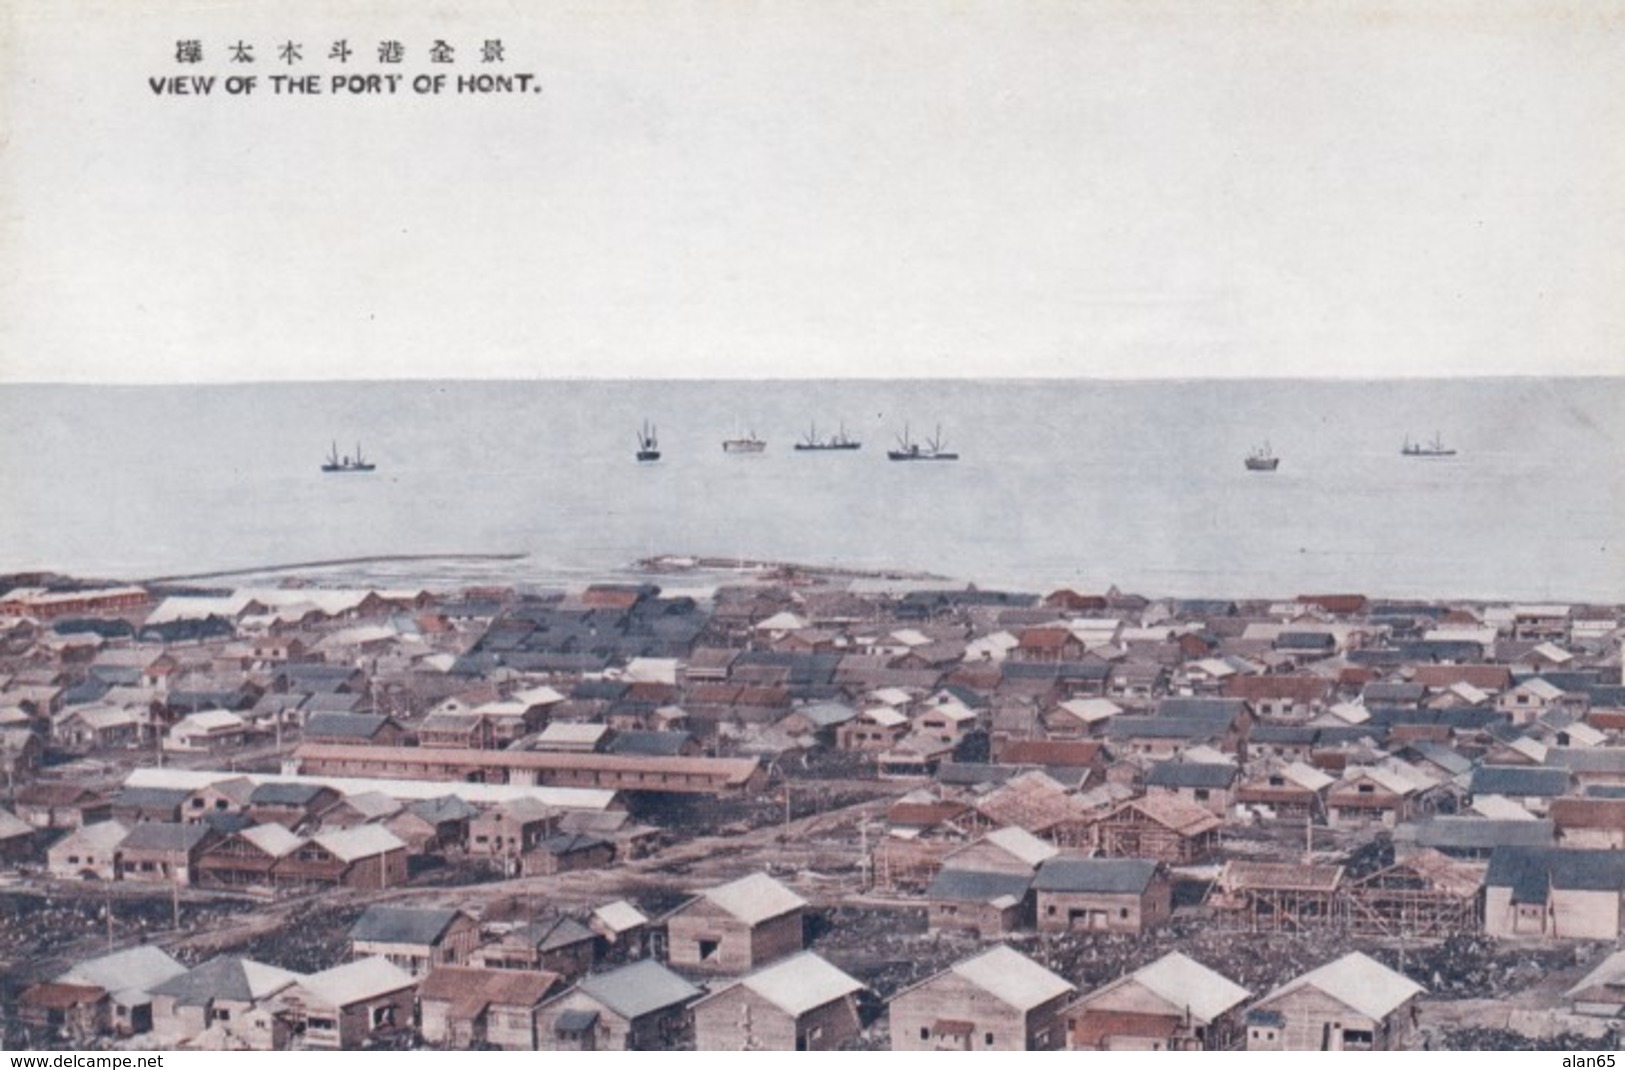 Japan Occupation Sakhalin Island, View Of The Port Of Hont, C1920s/30s Vintage Postcard - Russia